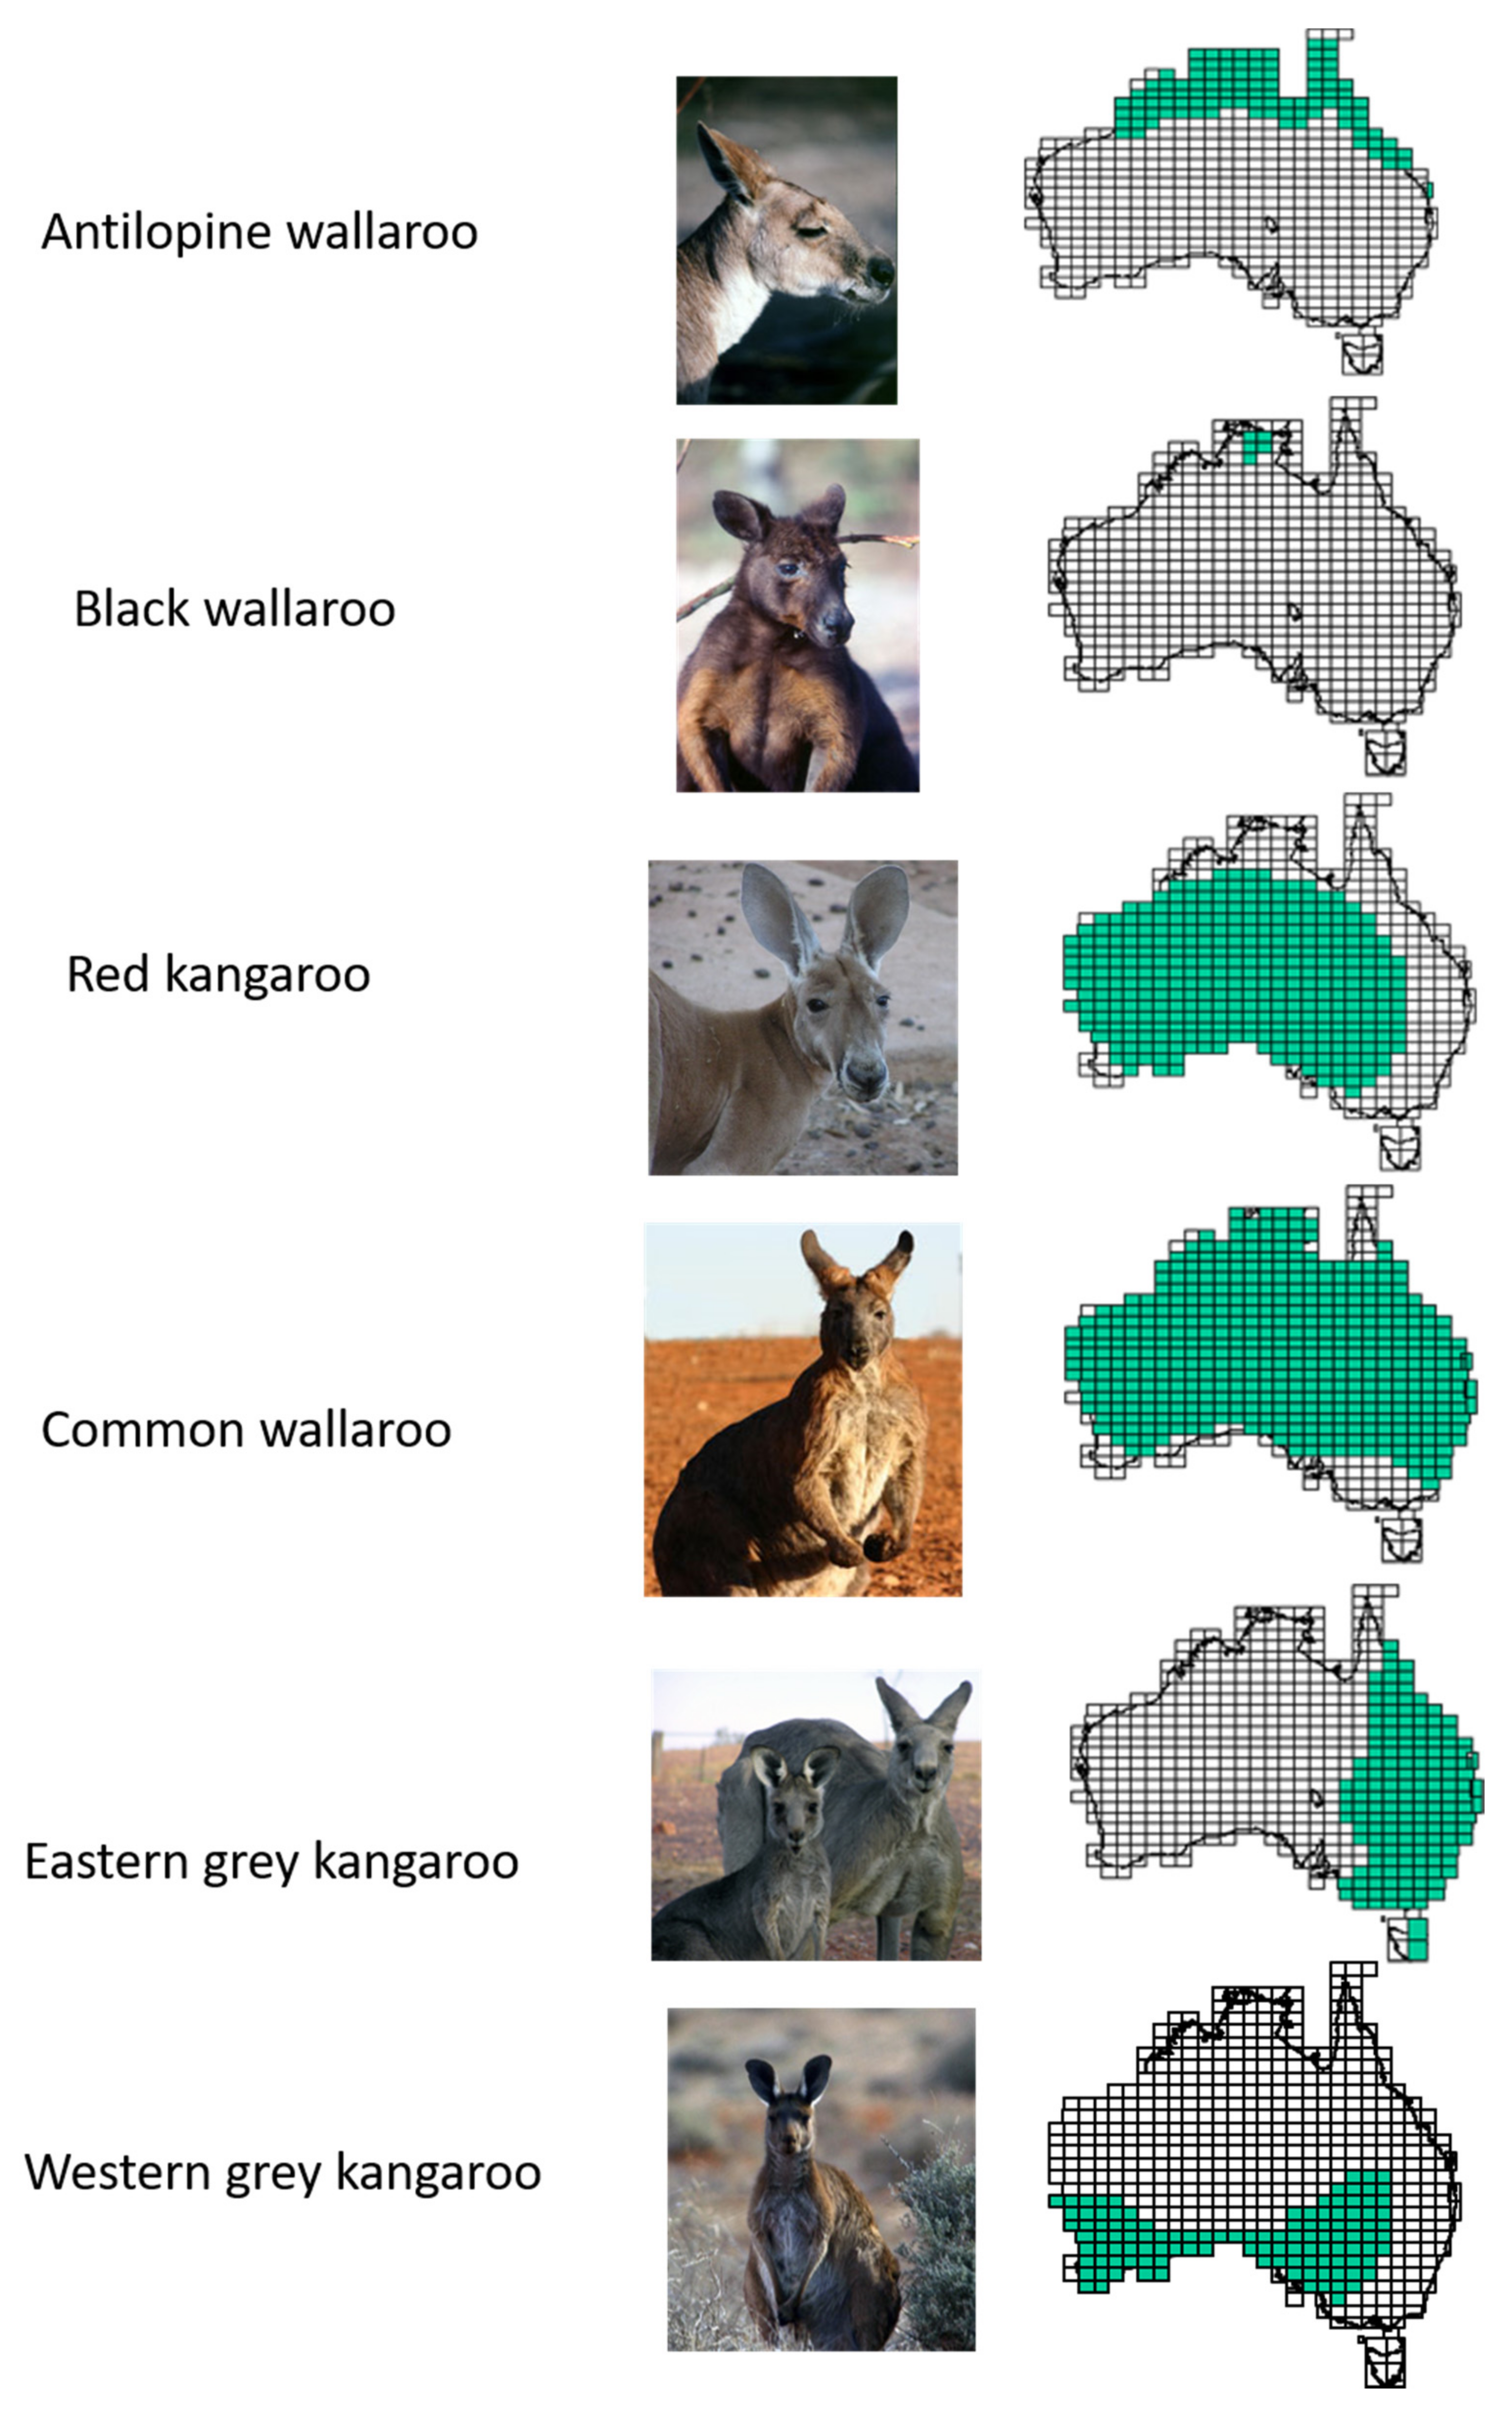 Animals | Free Full-Text | The Perils of Being Populous: Control and  Conservation of Abundant Kangaroo Species